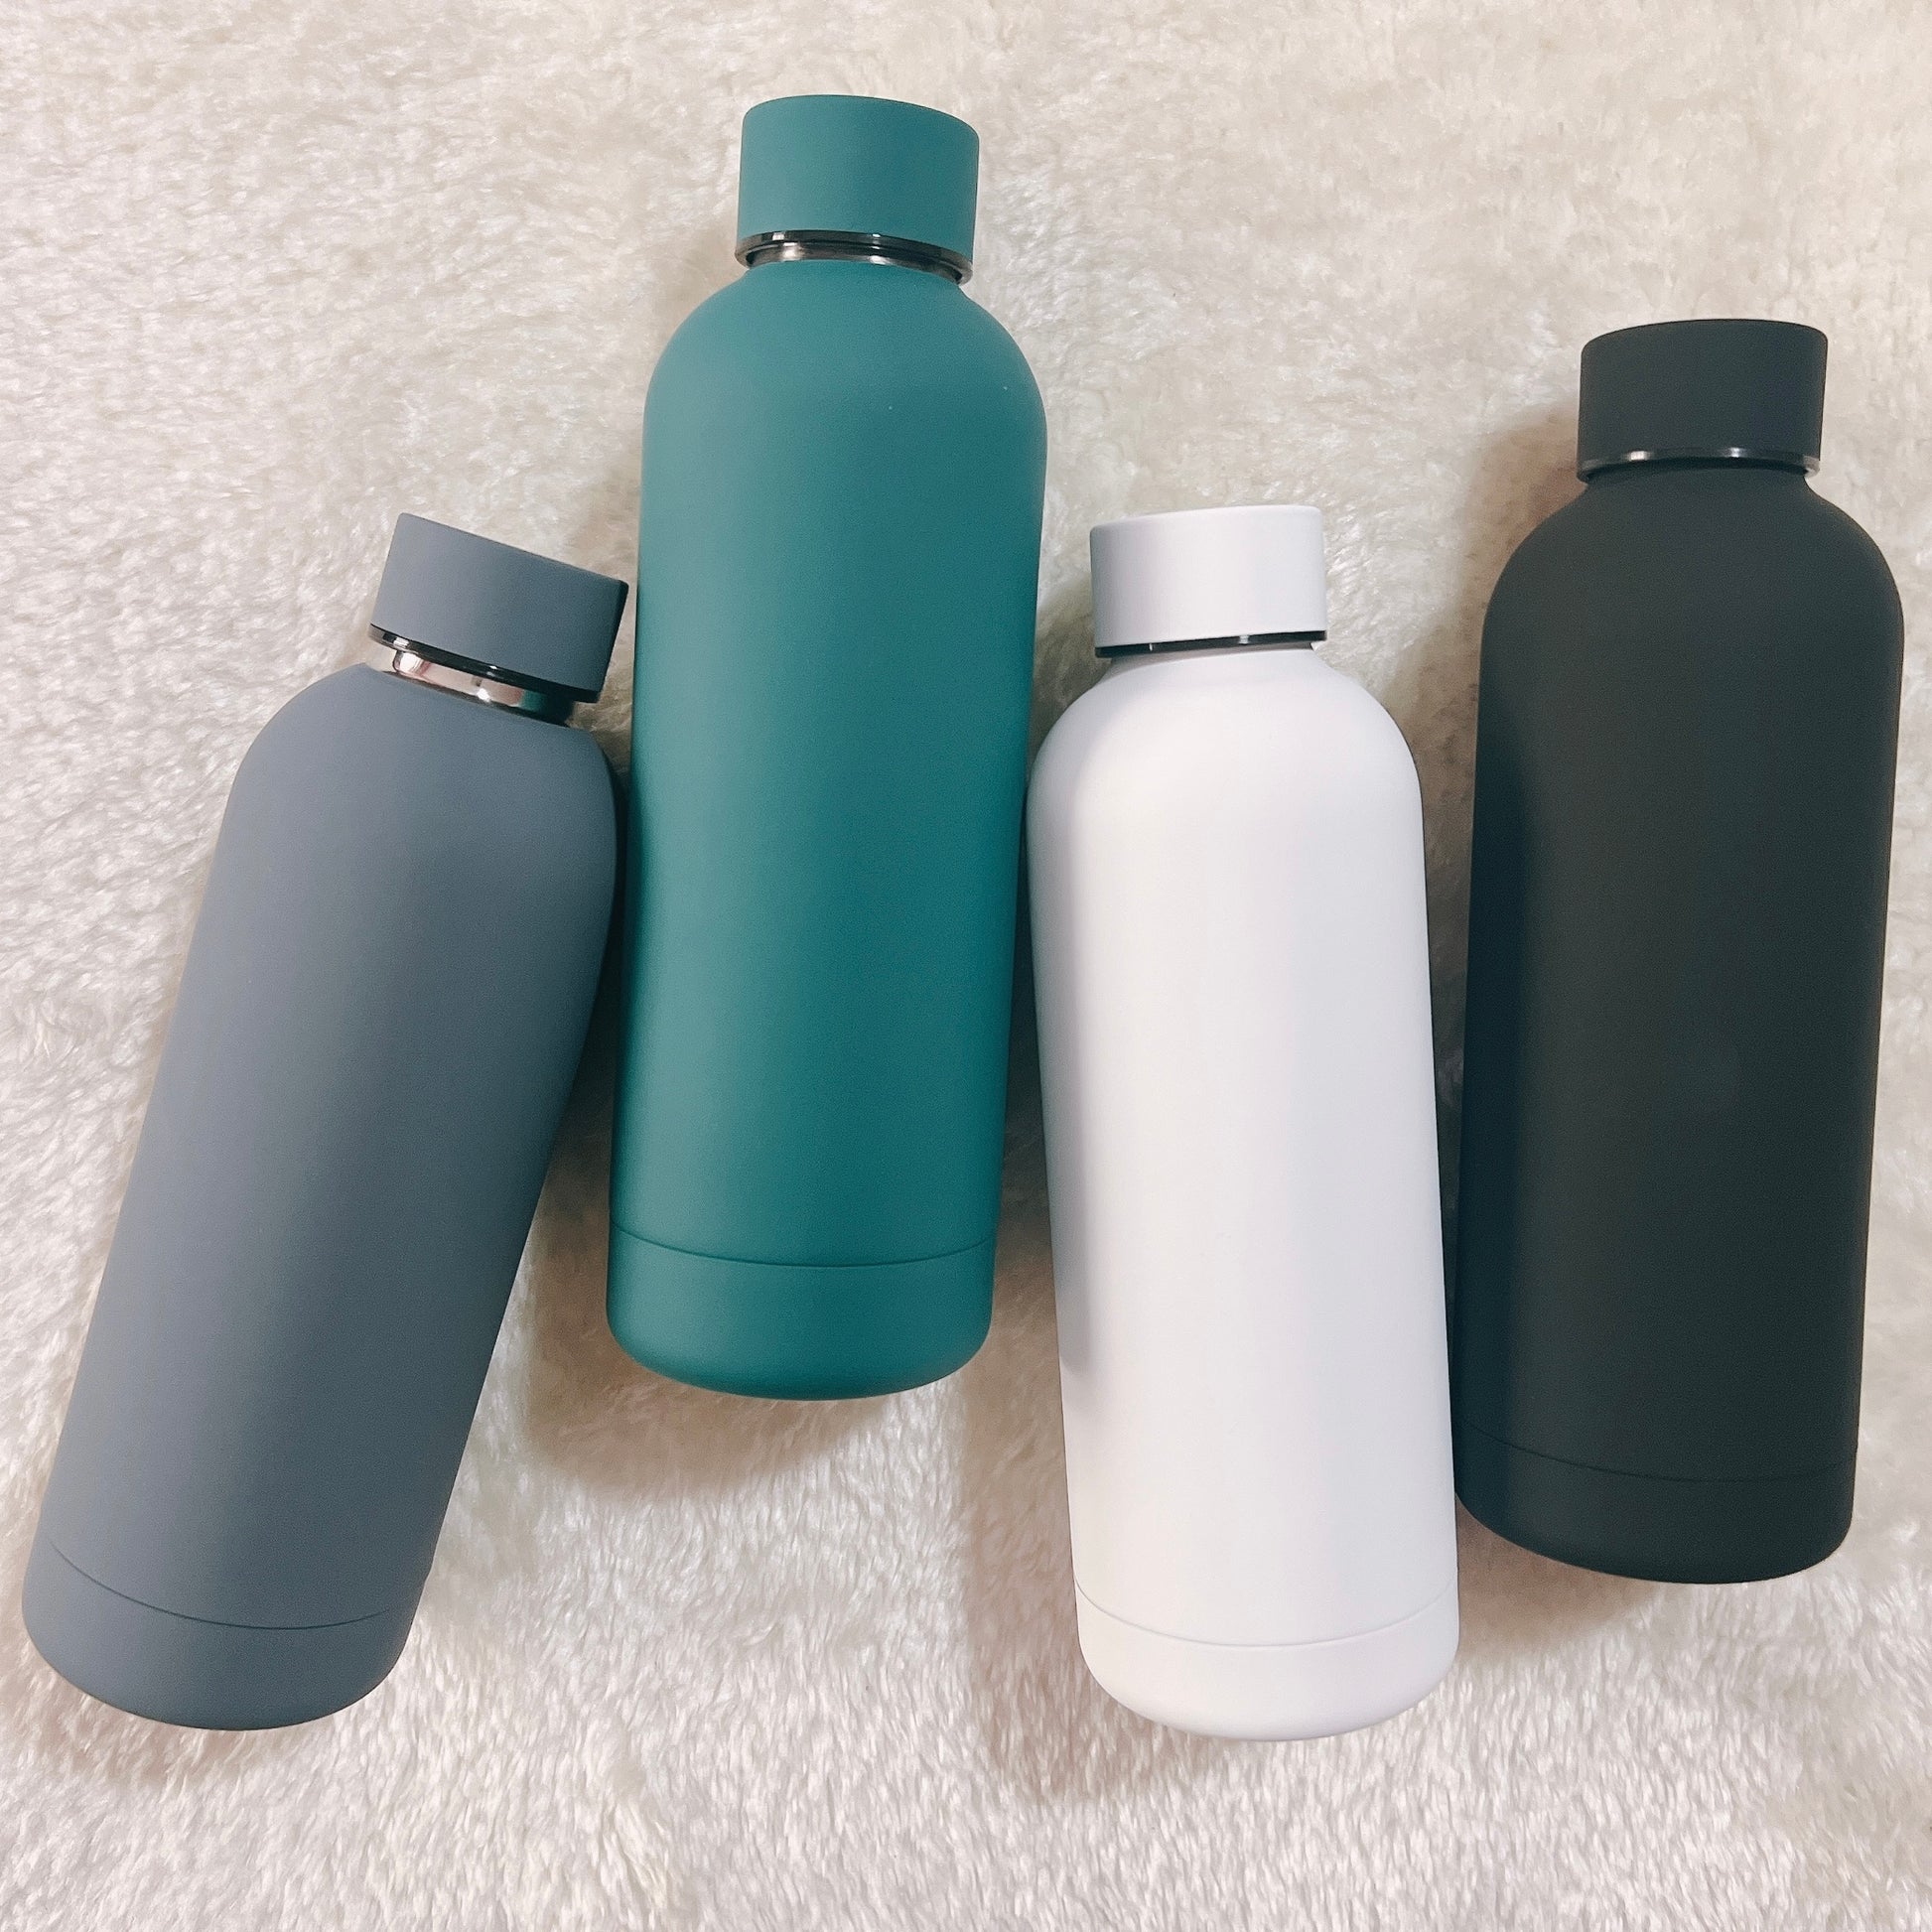 L V Metal Luxury Premium Thermos bottle, For Office, Capacity: 150ml